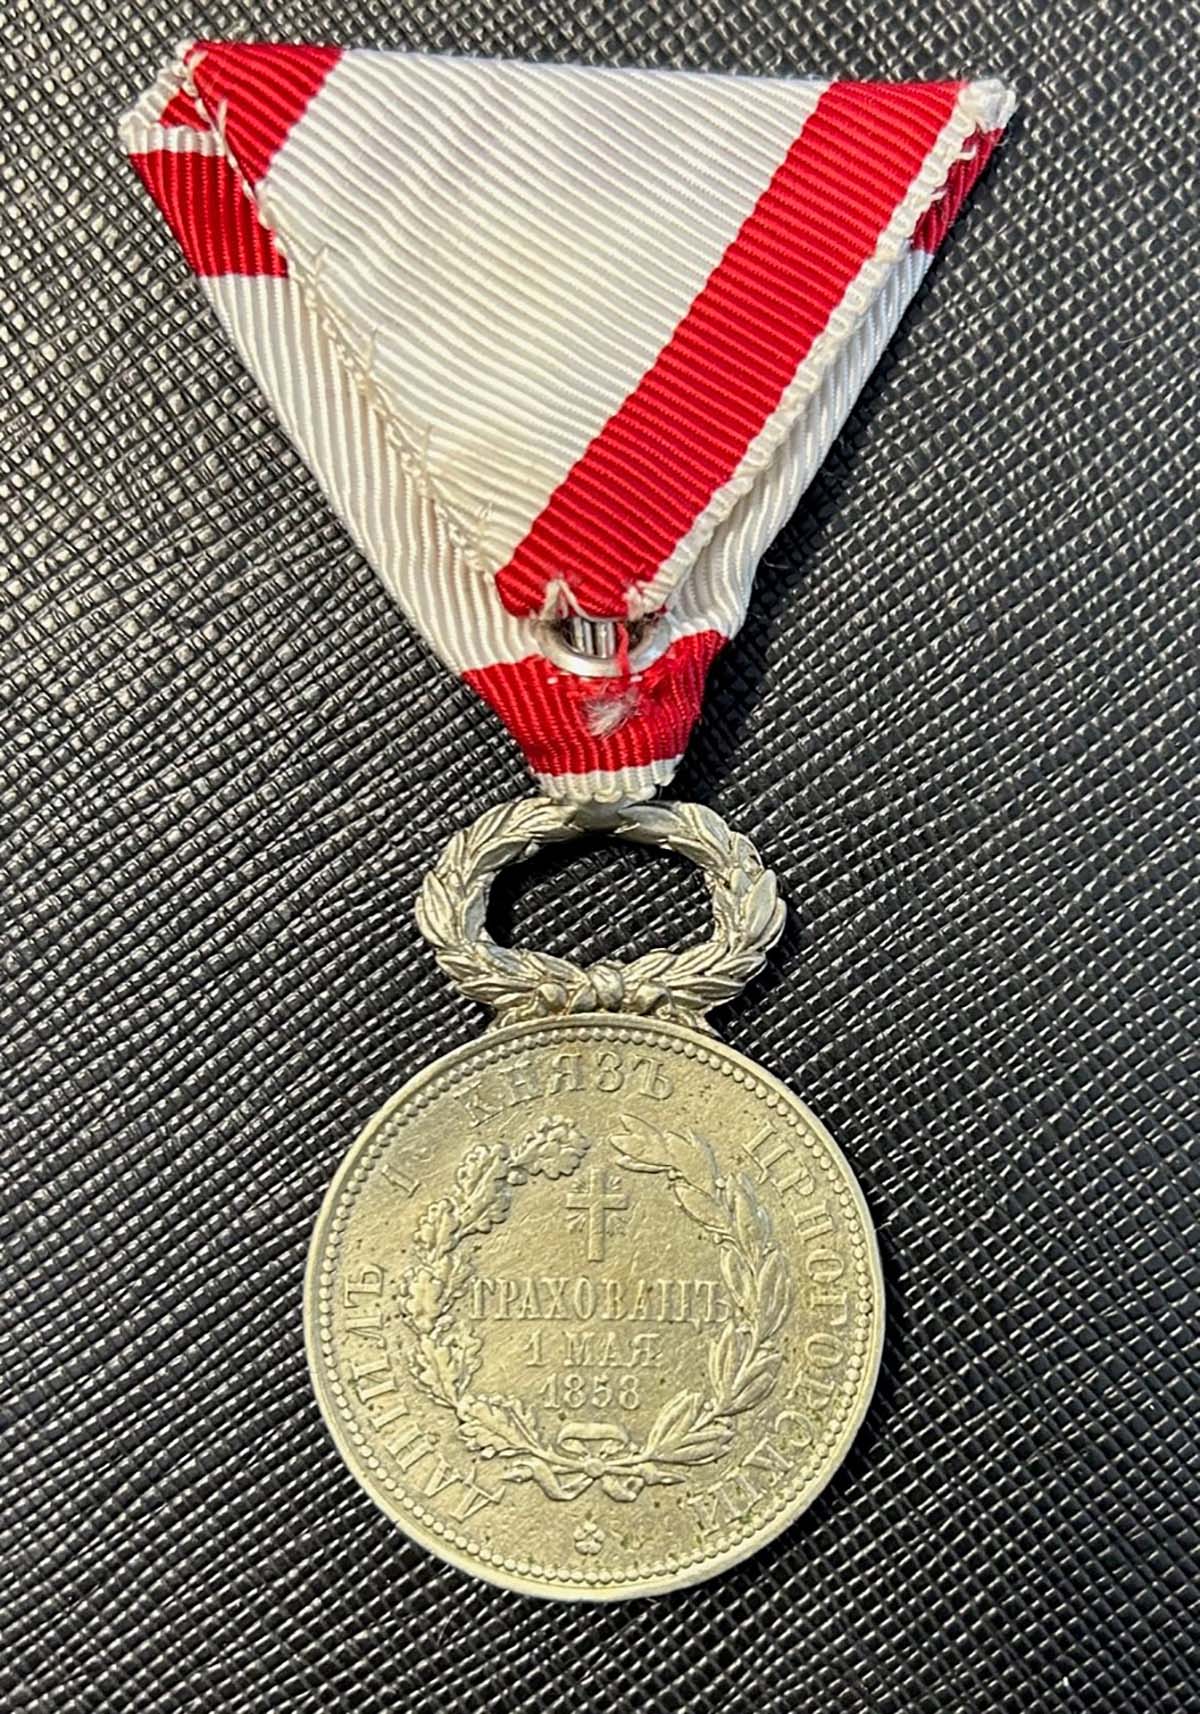 Montenegro - Medal for Battle of Grahovach 1858